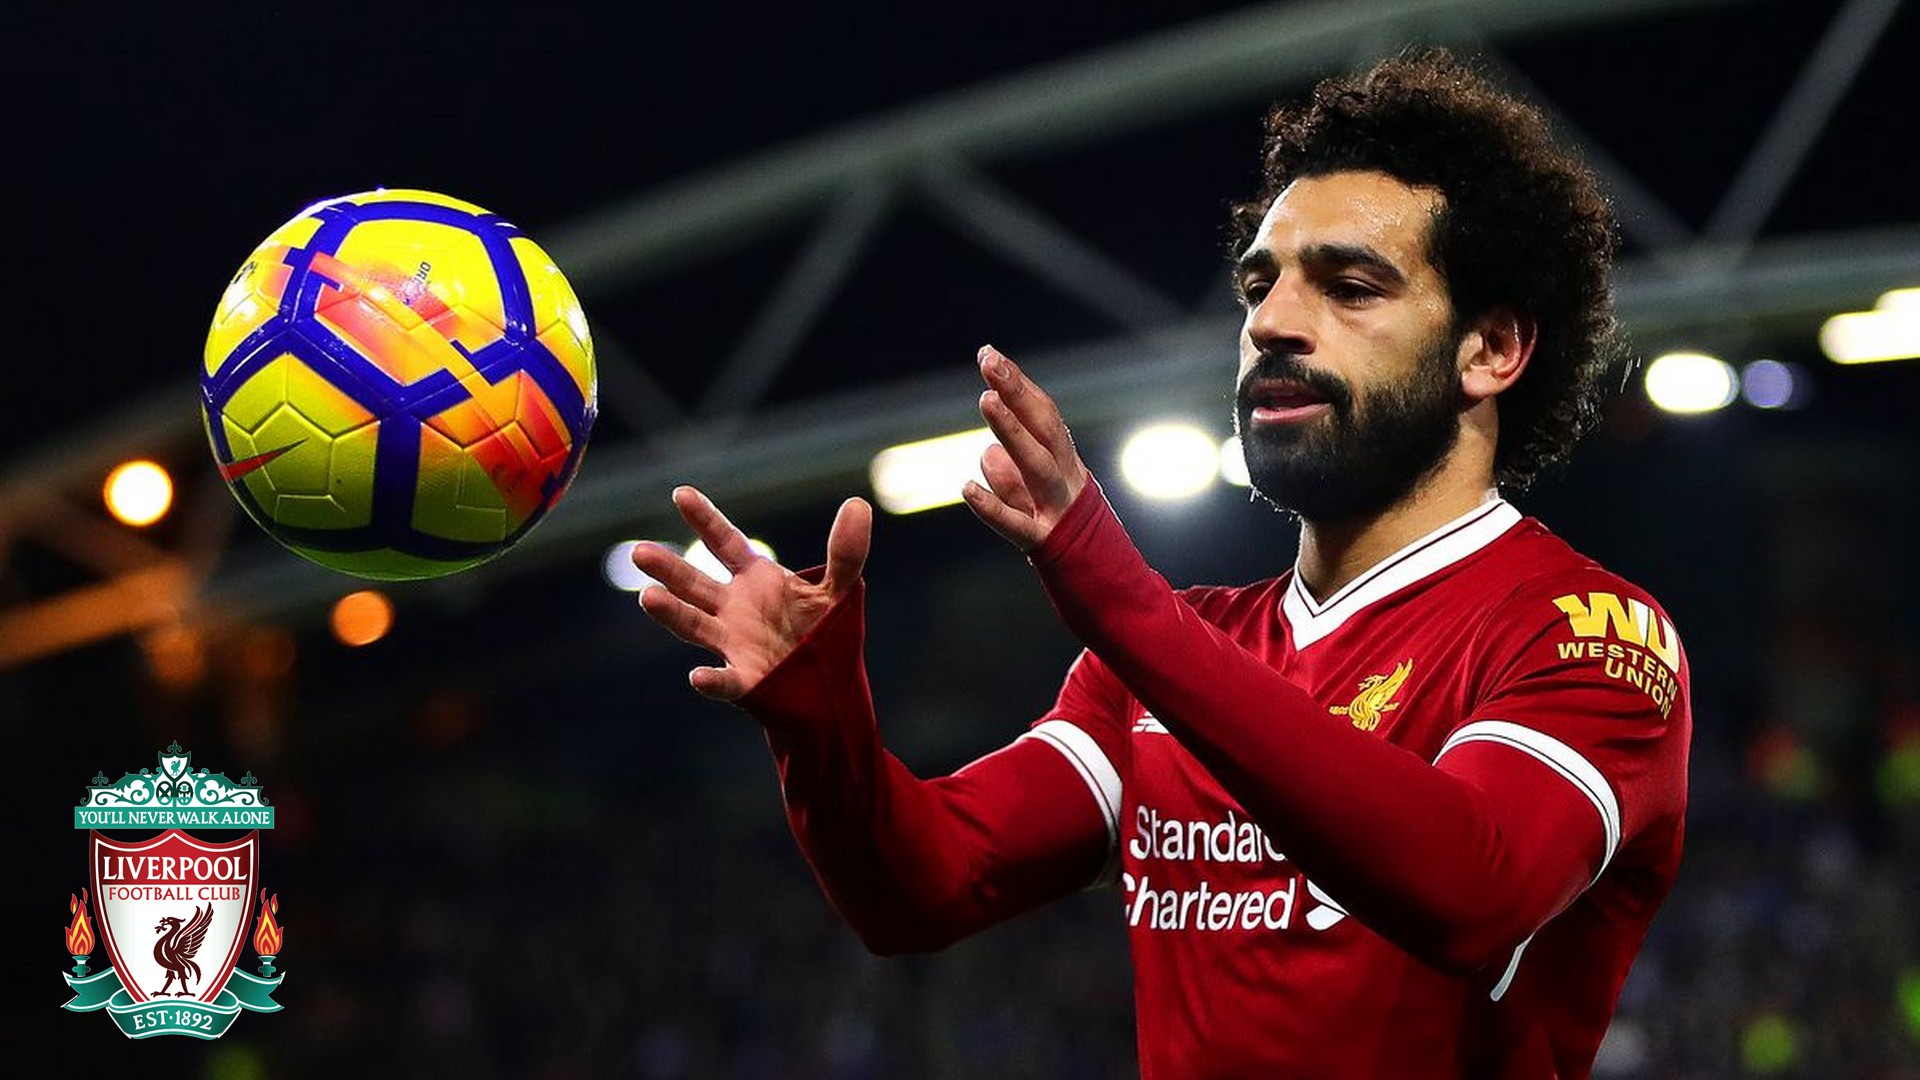 Mohamed Salah Liverpool HD Wallpaper With Resolution 1920X1080 pixel. You can make this wallpaper for your Desktop Computer Backgrounds, Mac Wallpapers, Android Lock screen or iPhone Screensavers